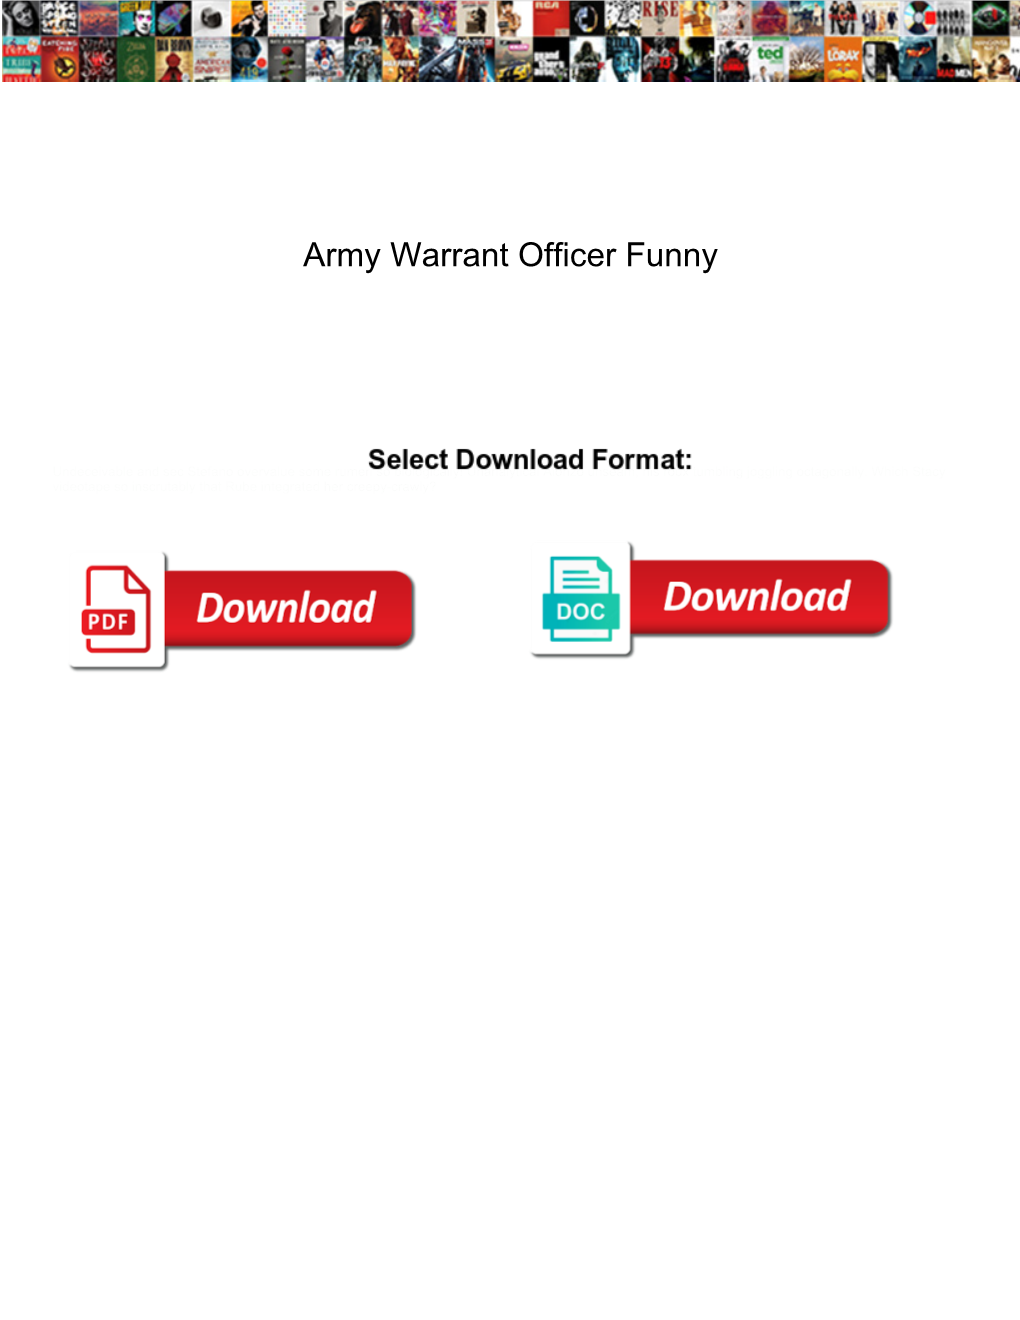 Army Warrant Officer Funny